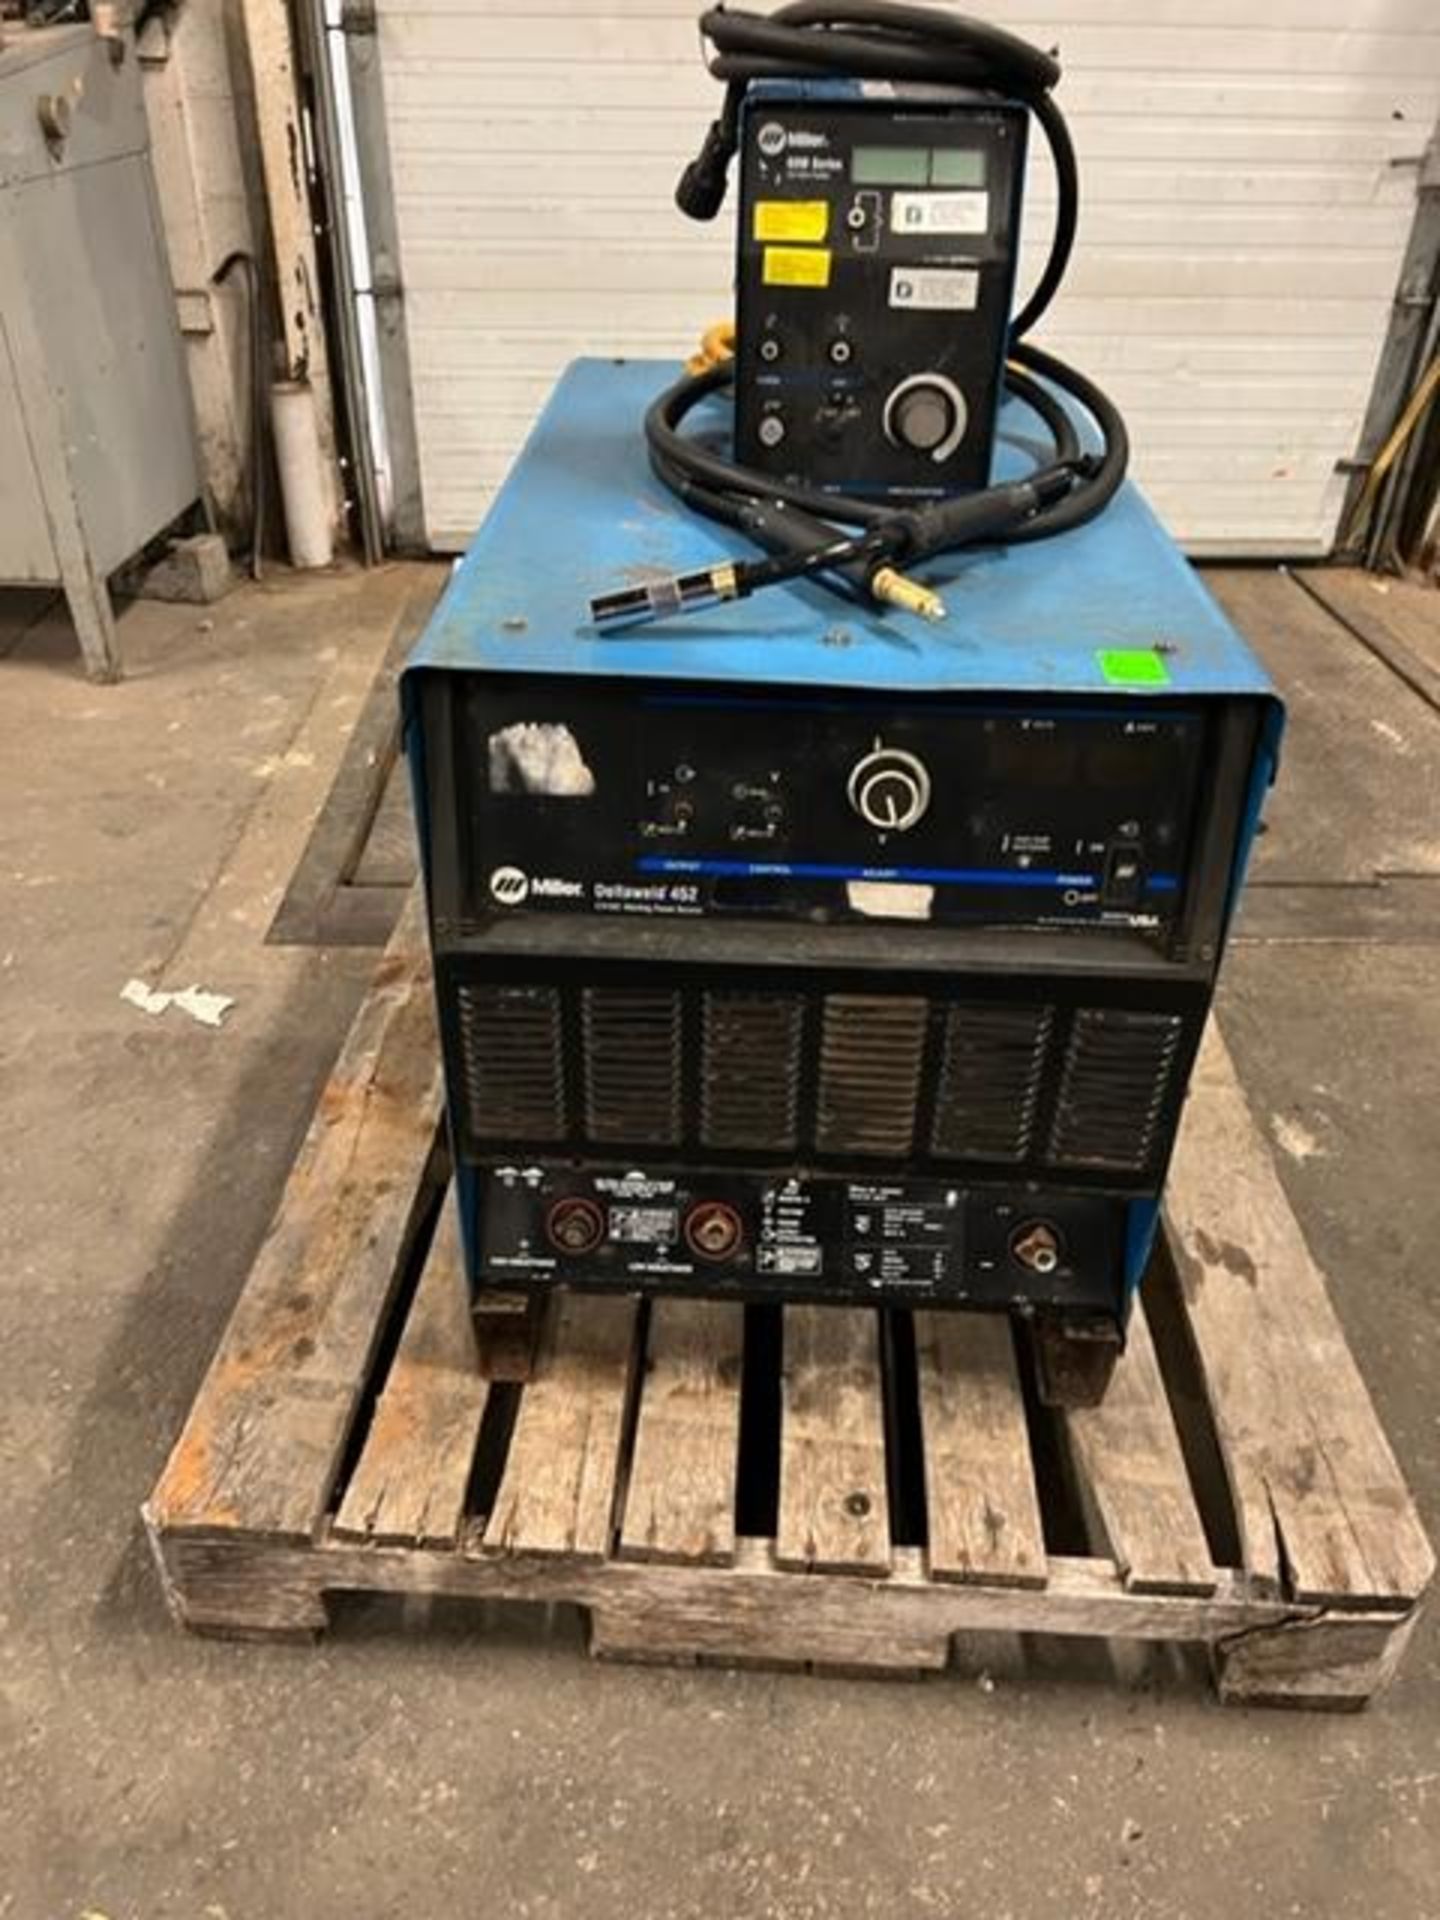 Miller Deltaweld 452 Mig Welder 450 Amp with 60M-S WIRE FEEDER 4-wheel COMPLETE with New Mig Gun and